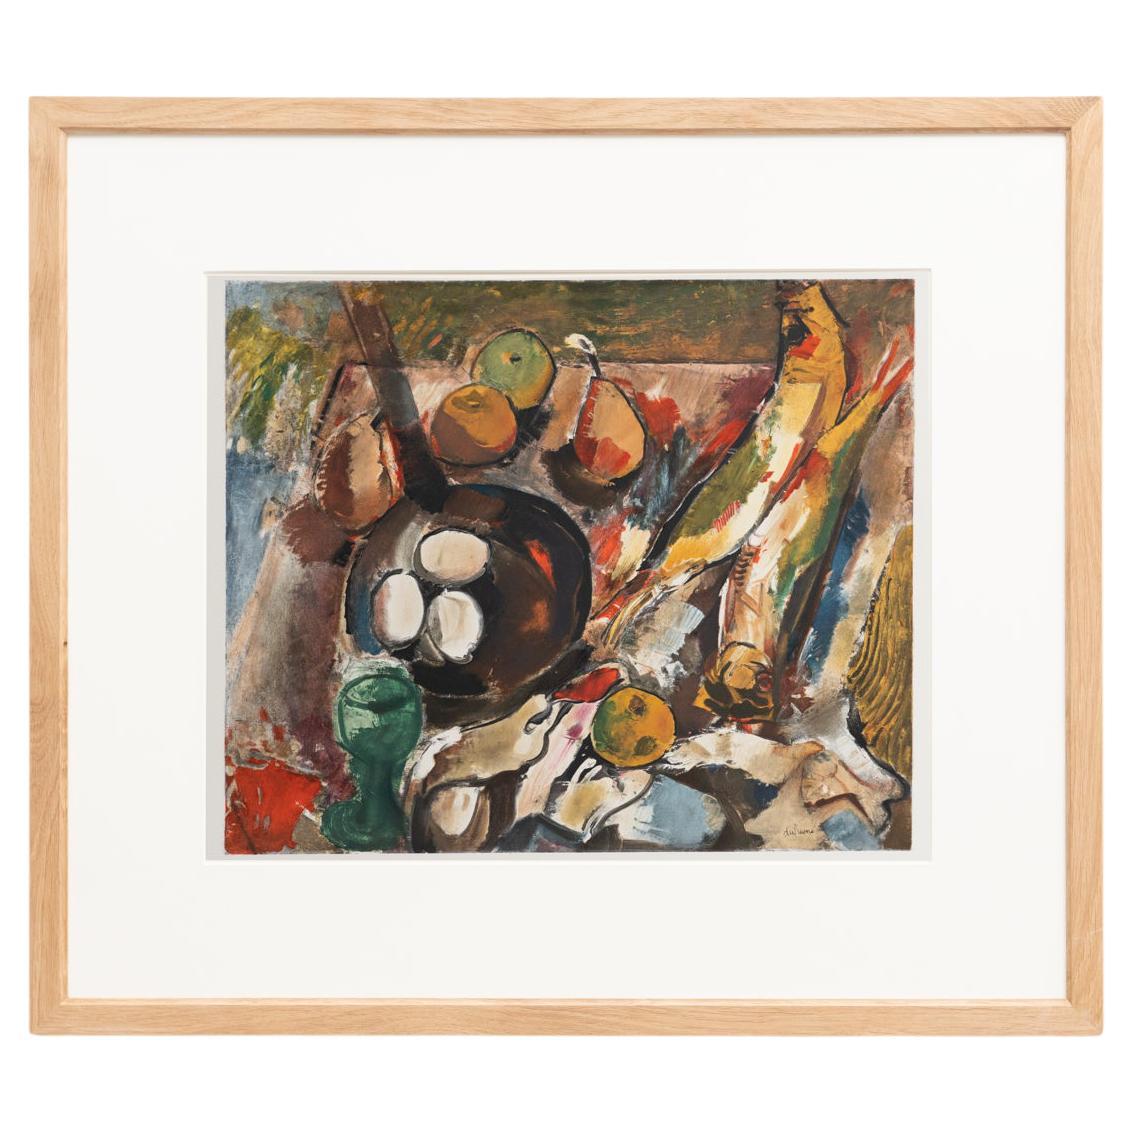 Charles Dufresne Framed 'Nature Morte' Lithography, circa 1971 For Sale